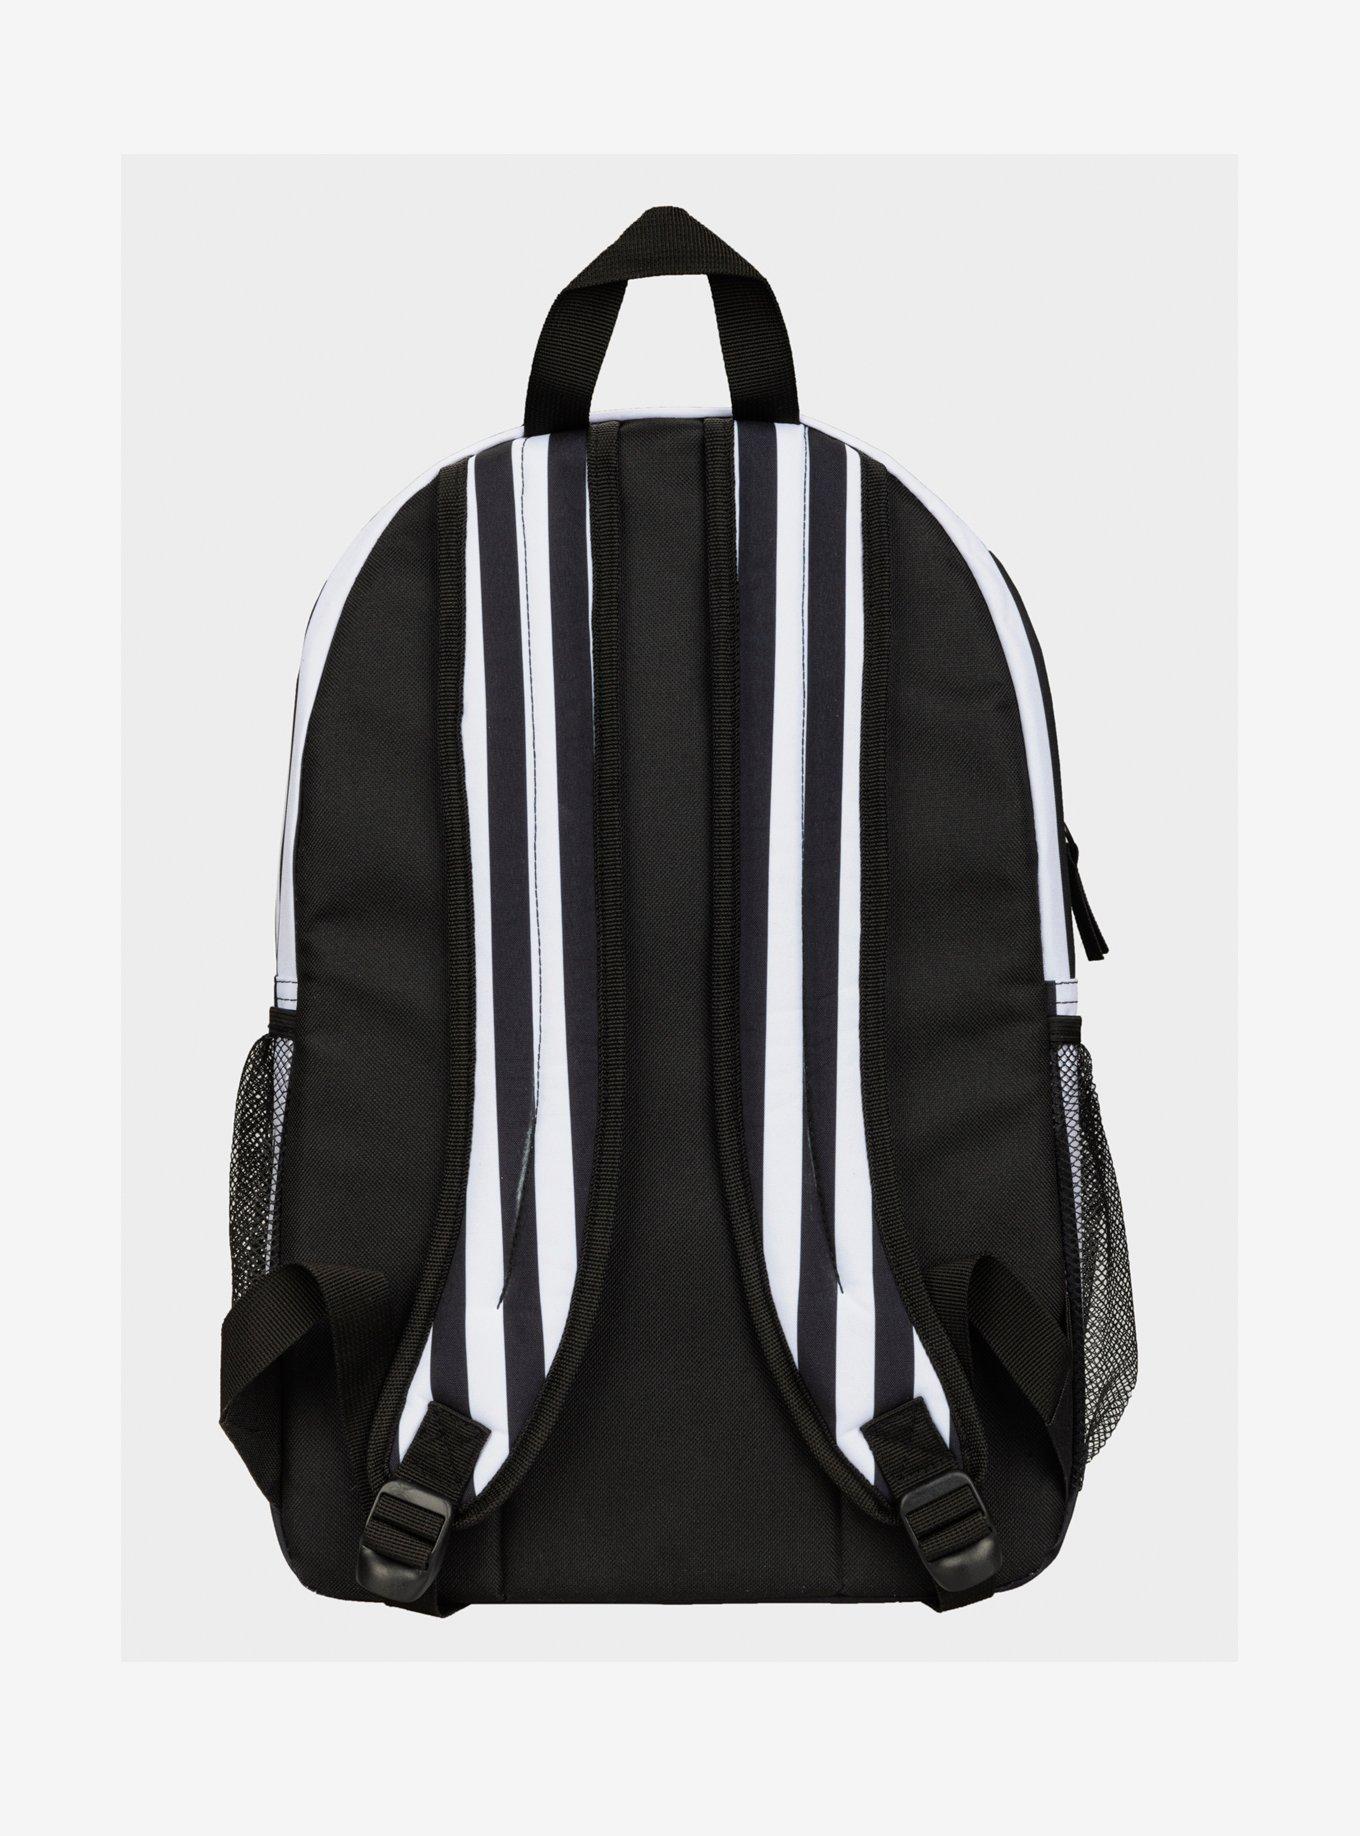 Stay Weird Striped Backpack, , alternate